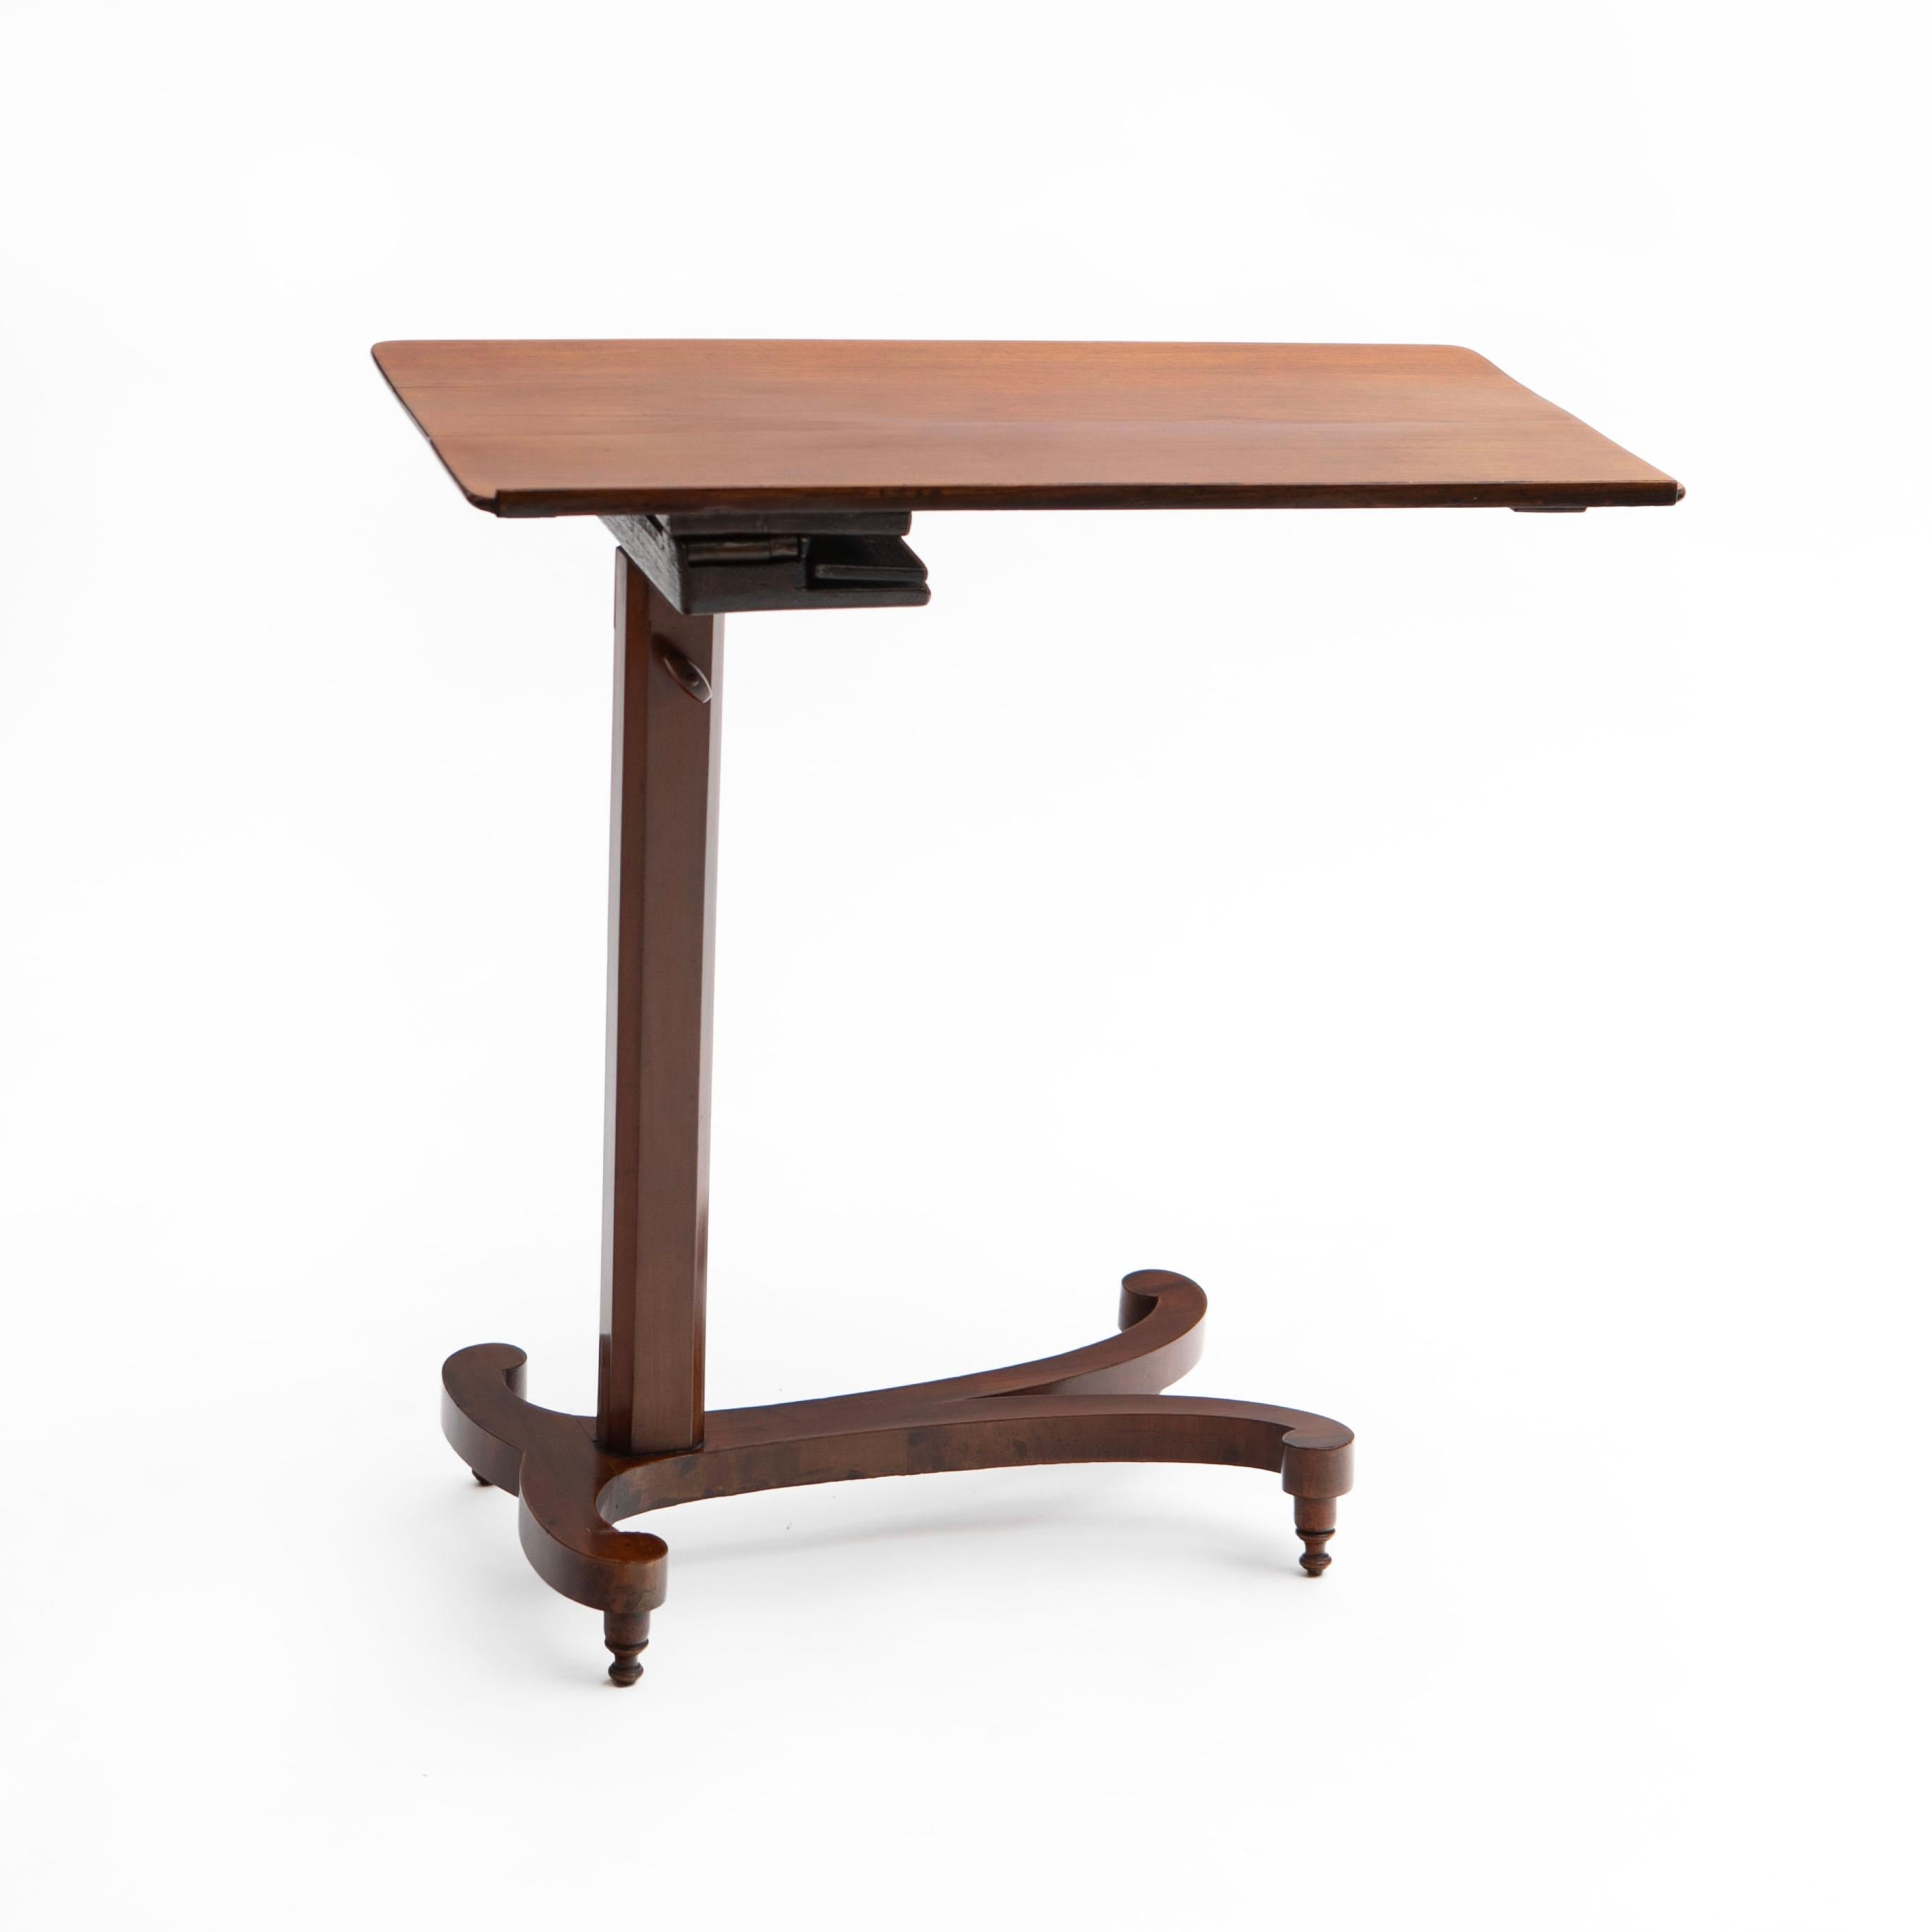 An elegant Regency period mahogany lectern or reading bedside table.
The table is featuring a tabletop may be tilted flat or angled and has a small latched ledge to hold a book. It also has a base that expands to change the height, adjustable from: